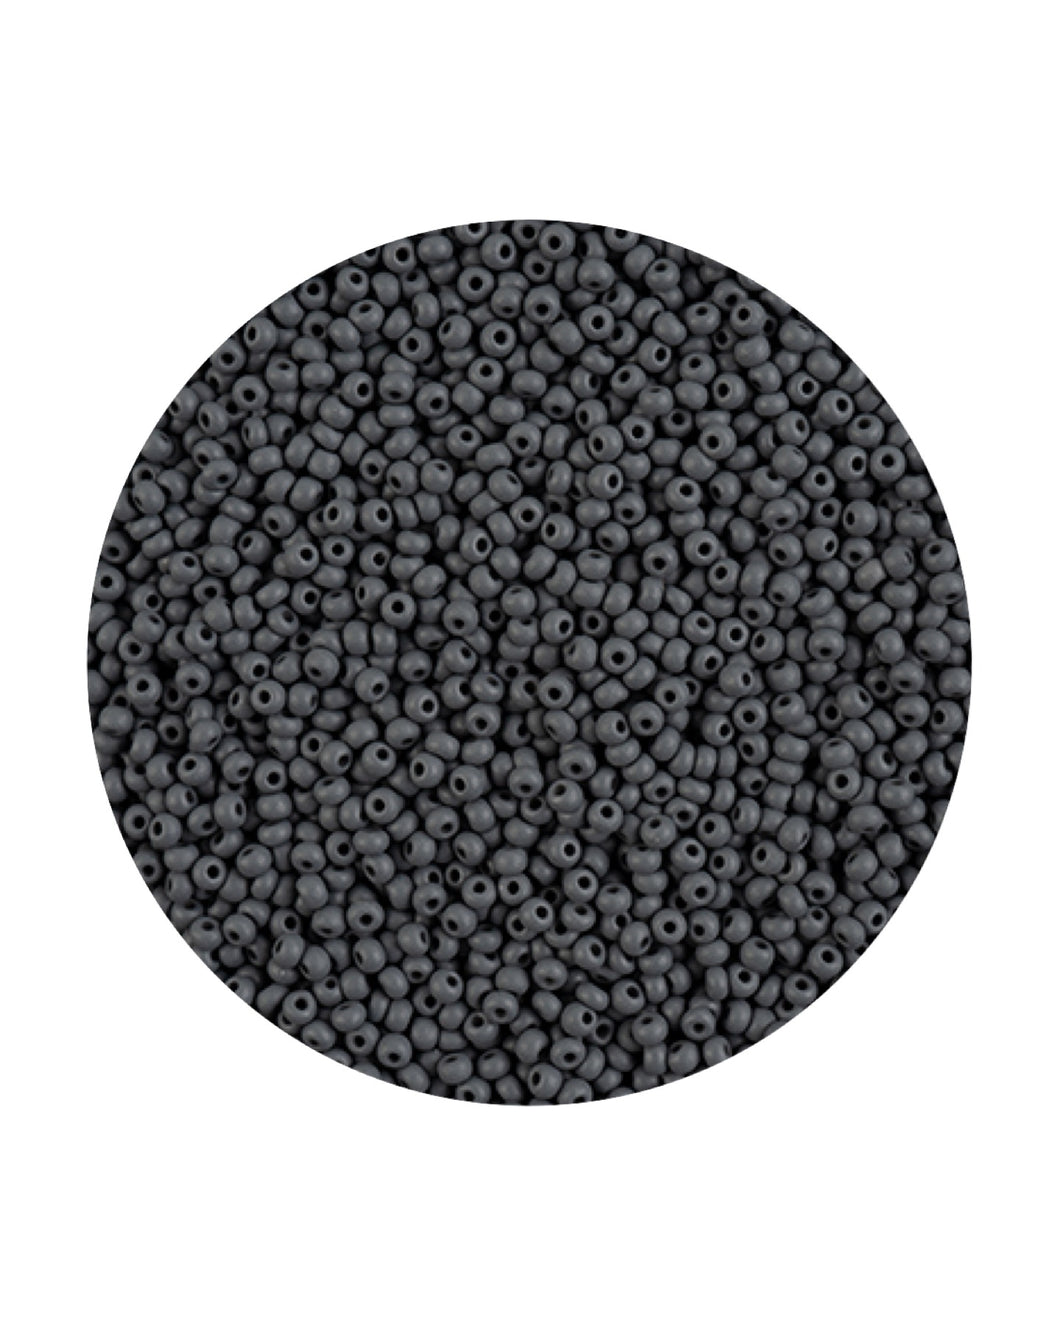 11/0 Preciosa Permalux Seed Beads Dyed Chalk Grey Matte, 23g Bags